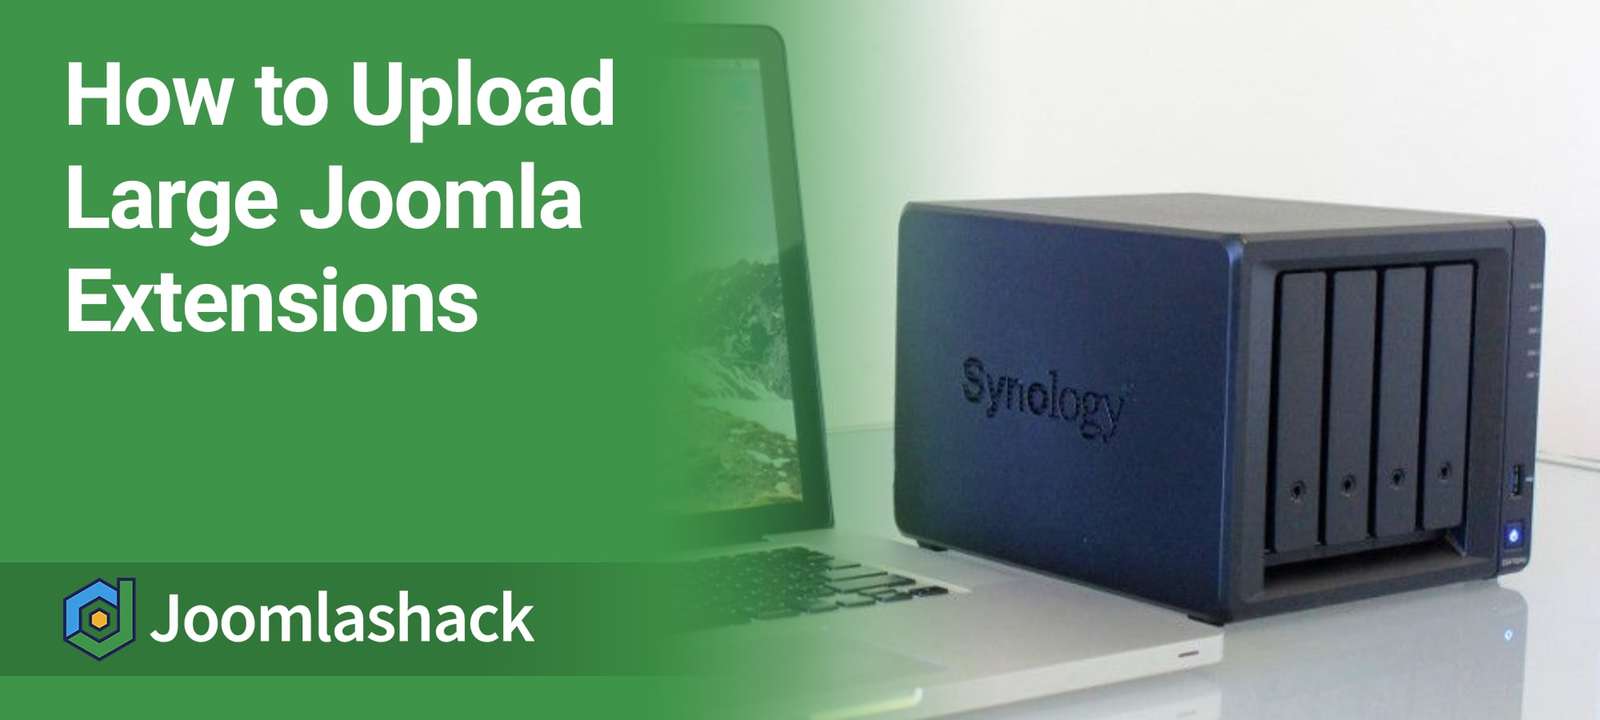 How to Upload Large Joomla Extensions